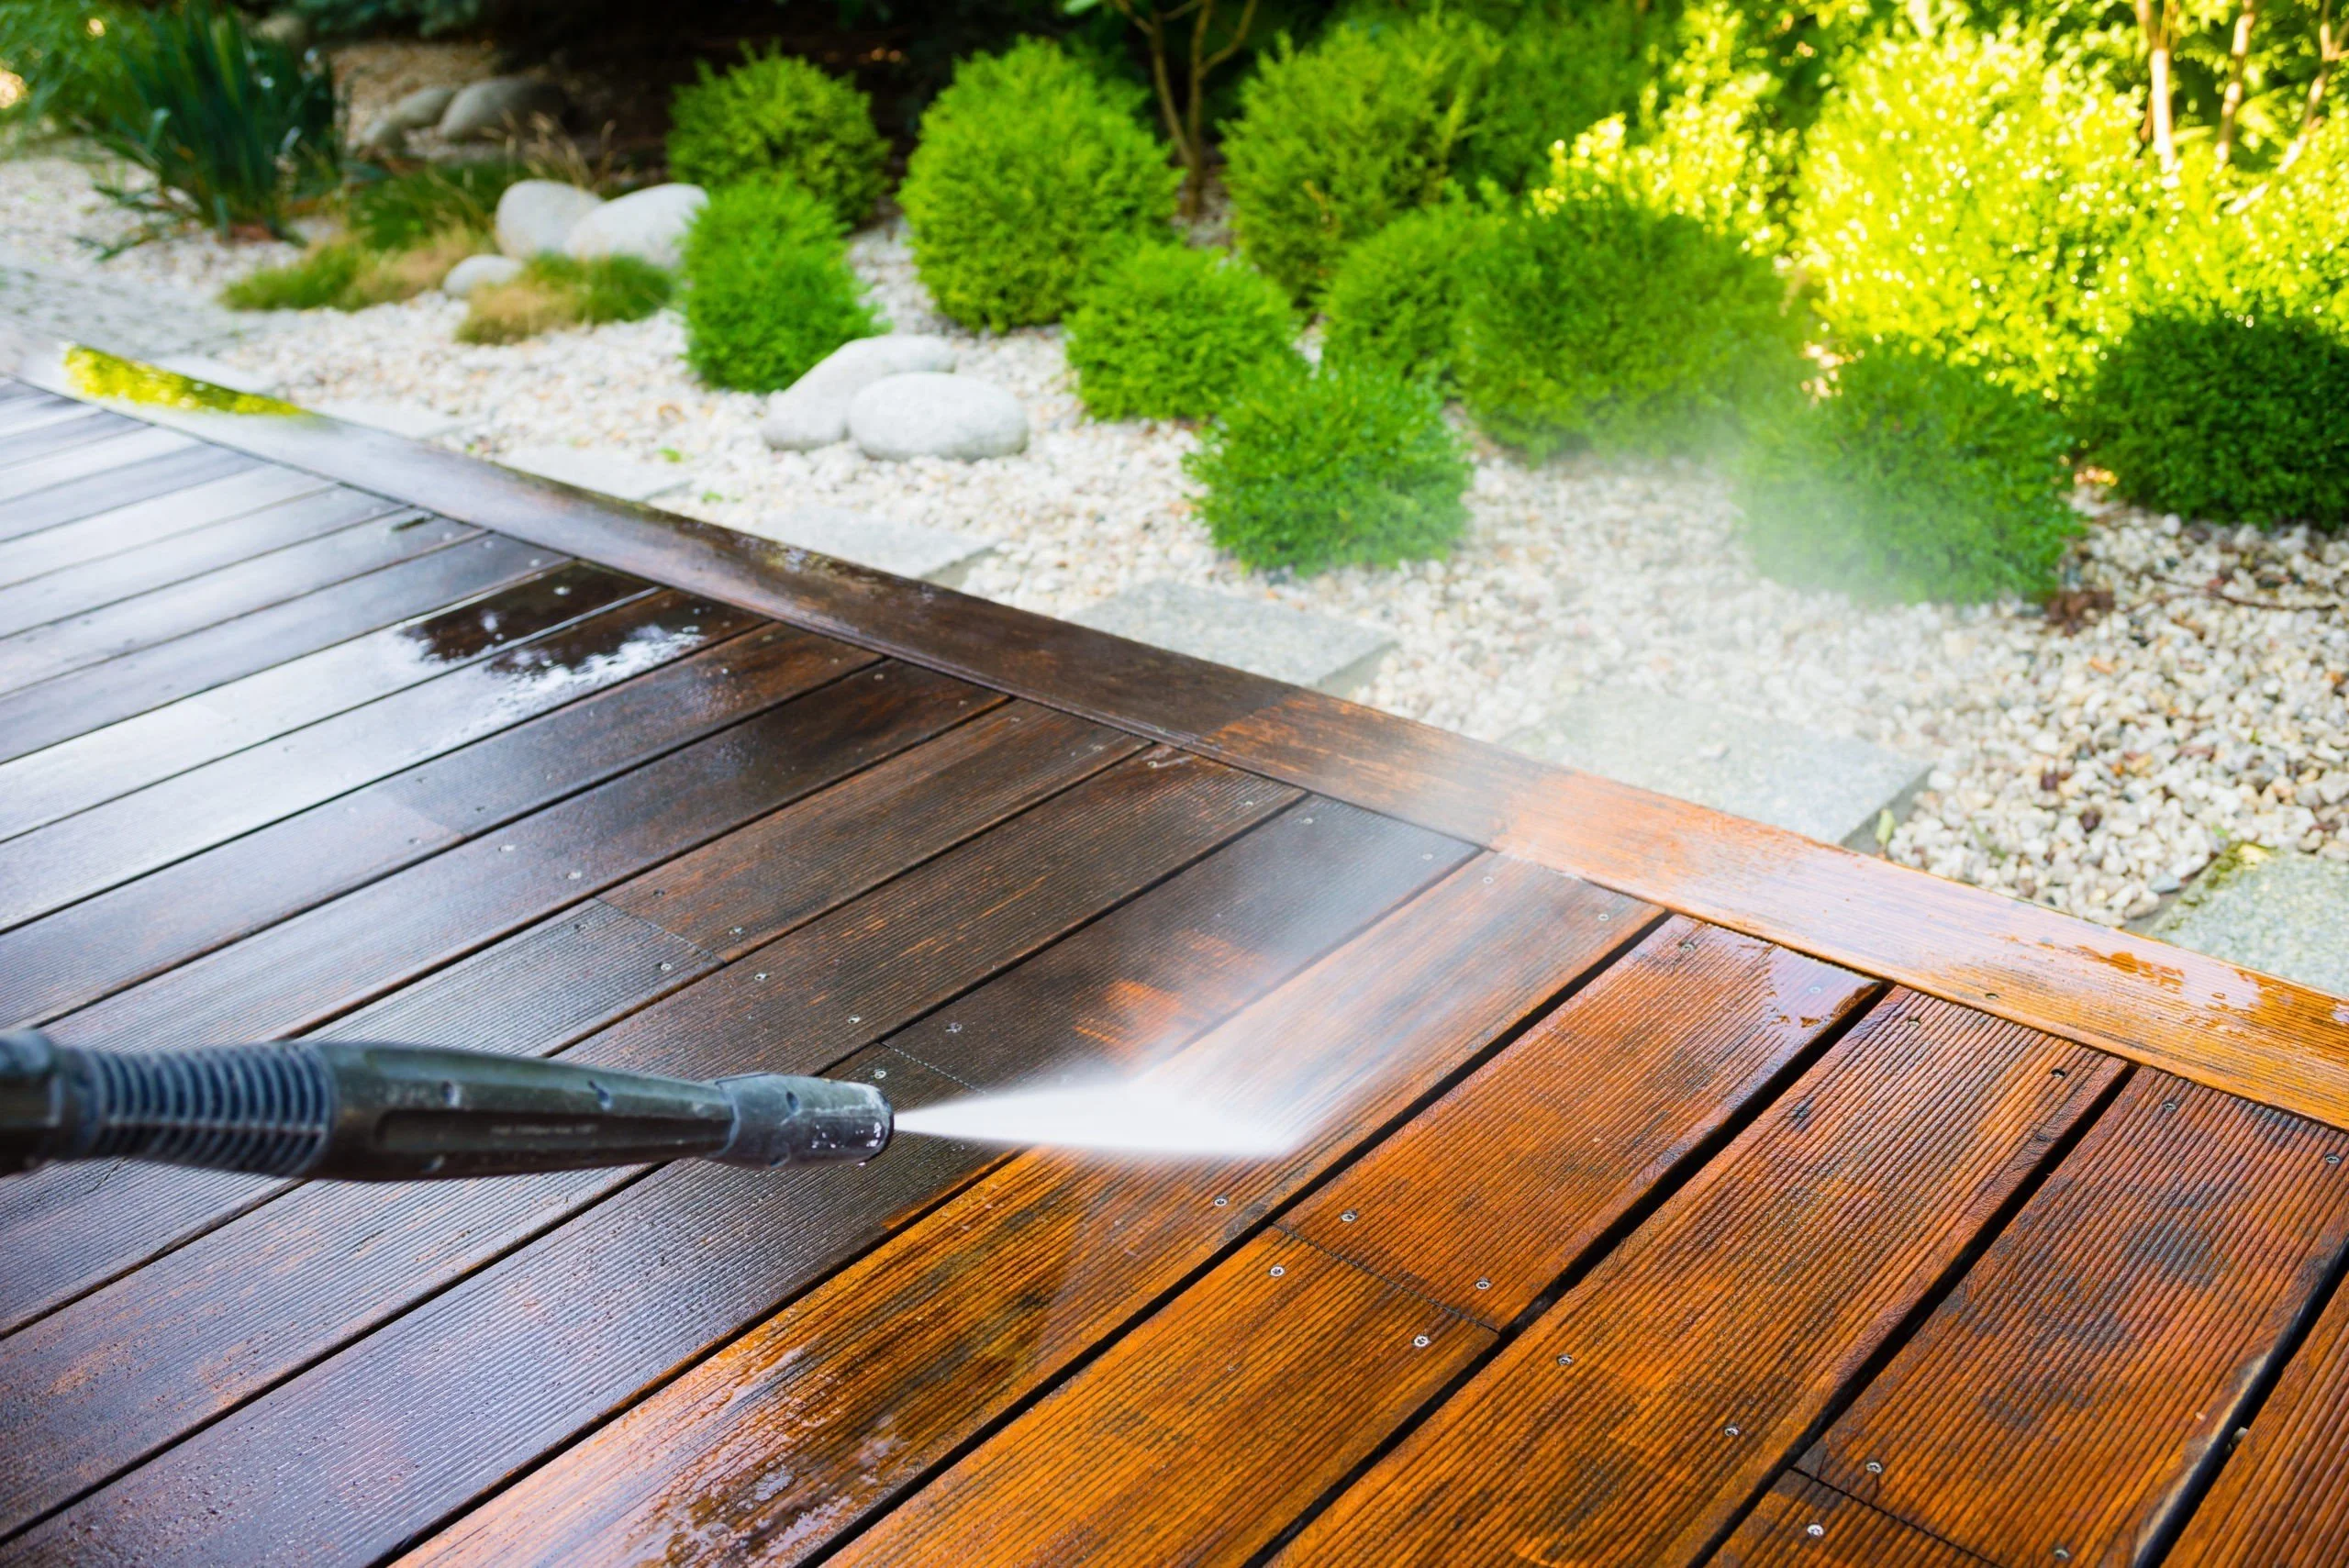 a person using a pressure washer on a wooden deck